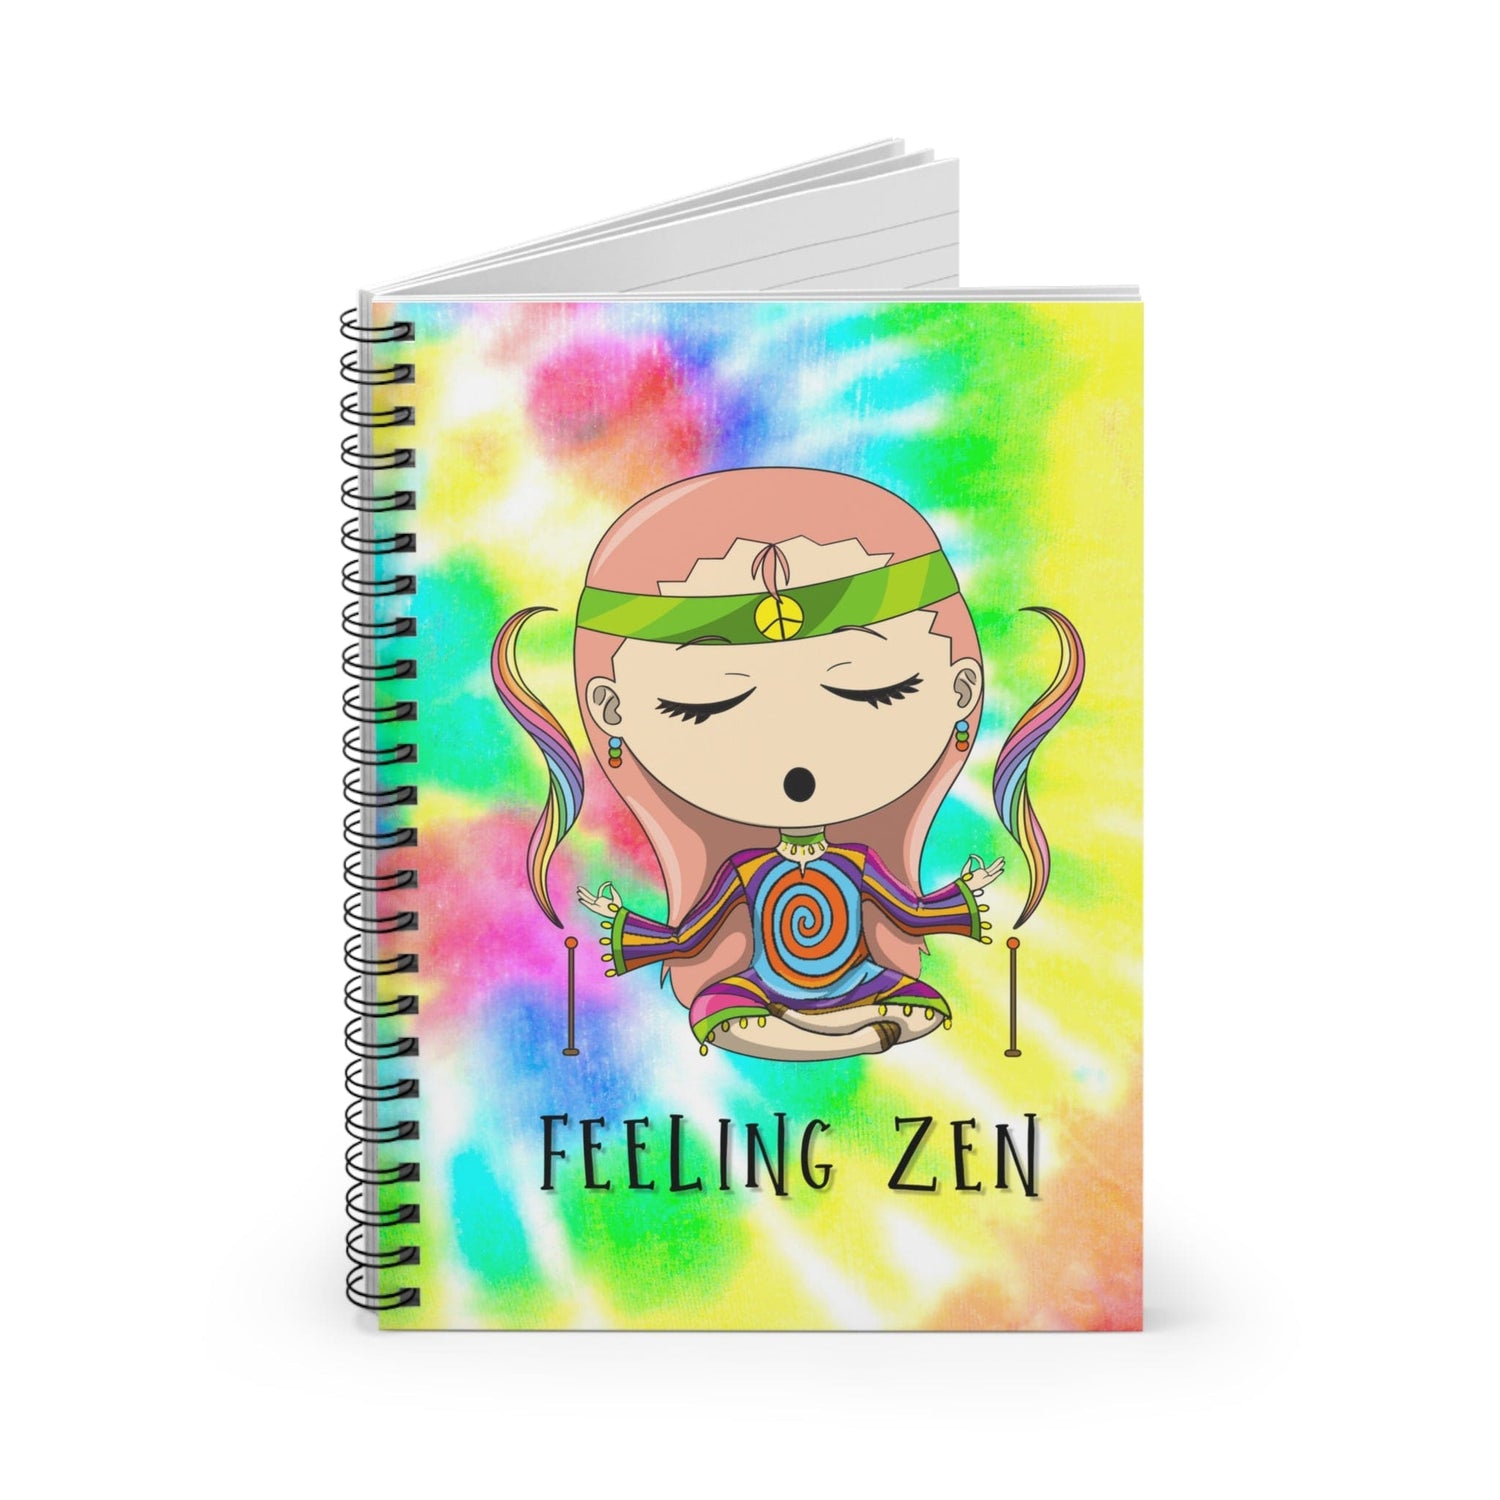 Paper products One Size Feeling Zen Spiral Notebook